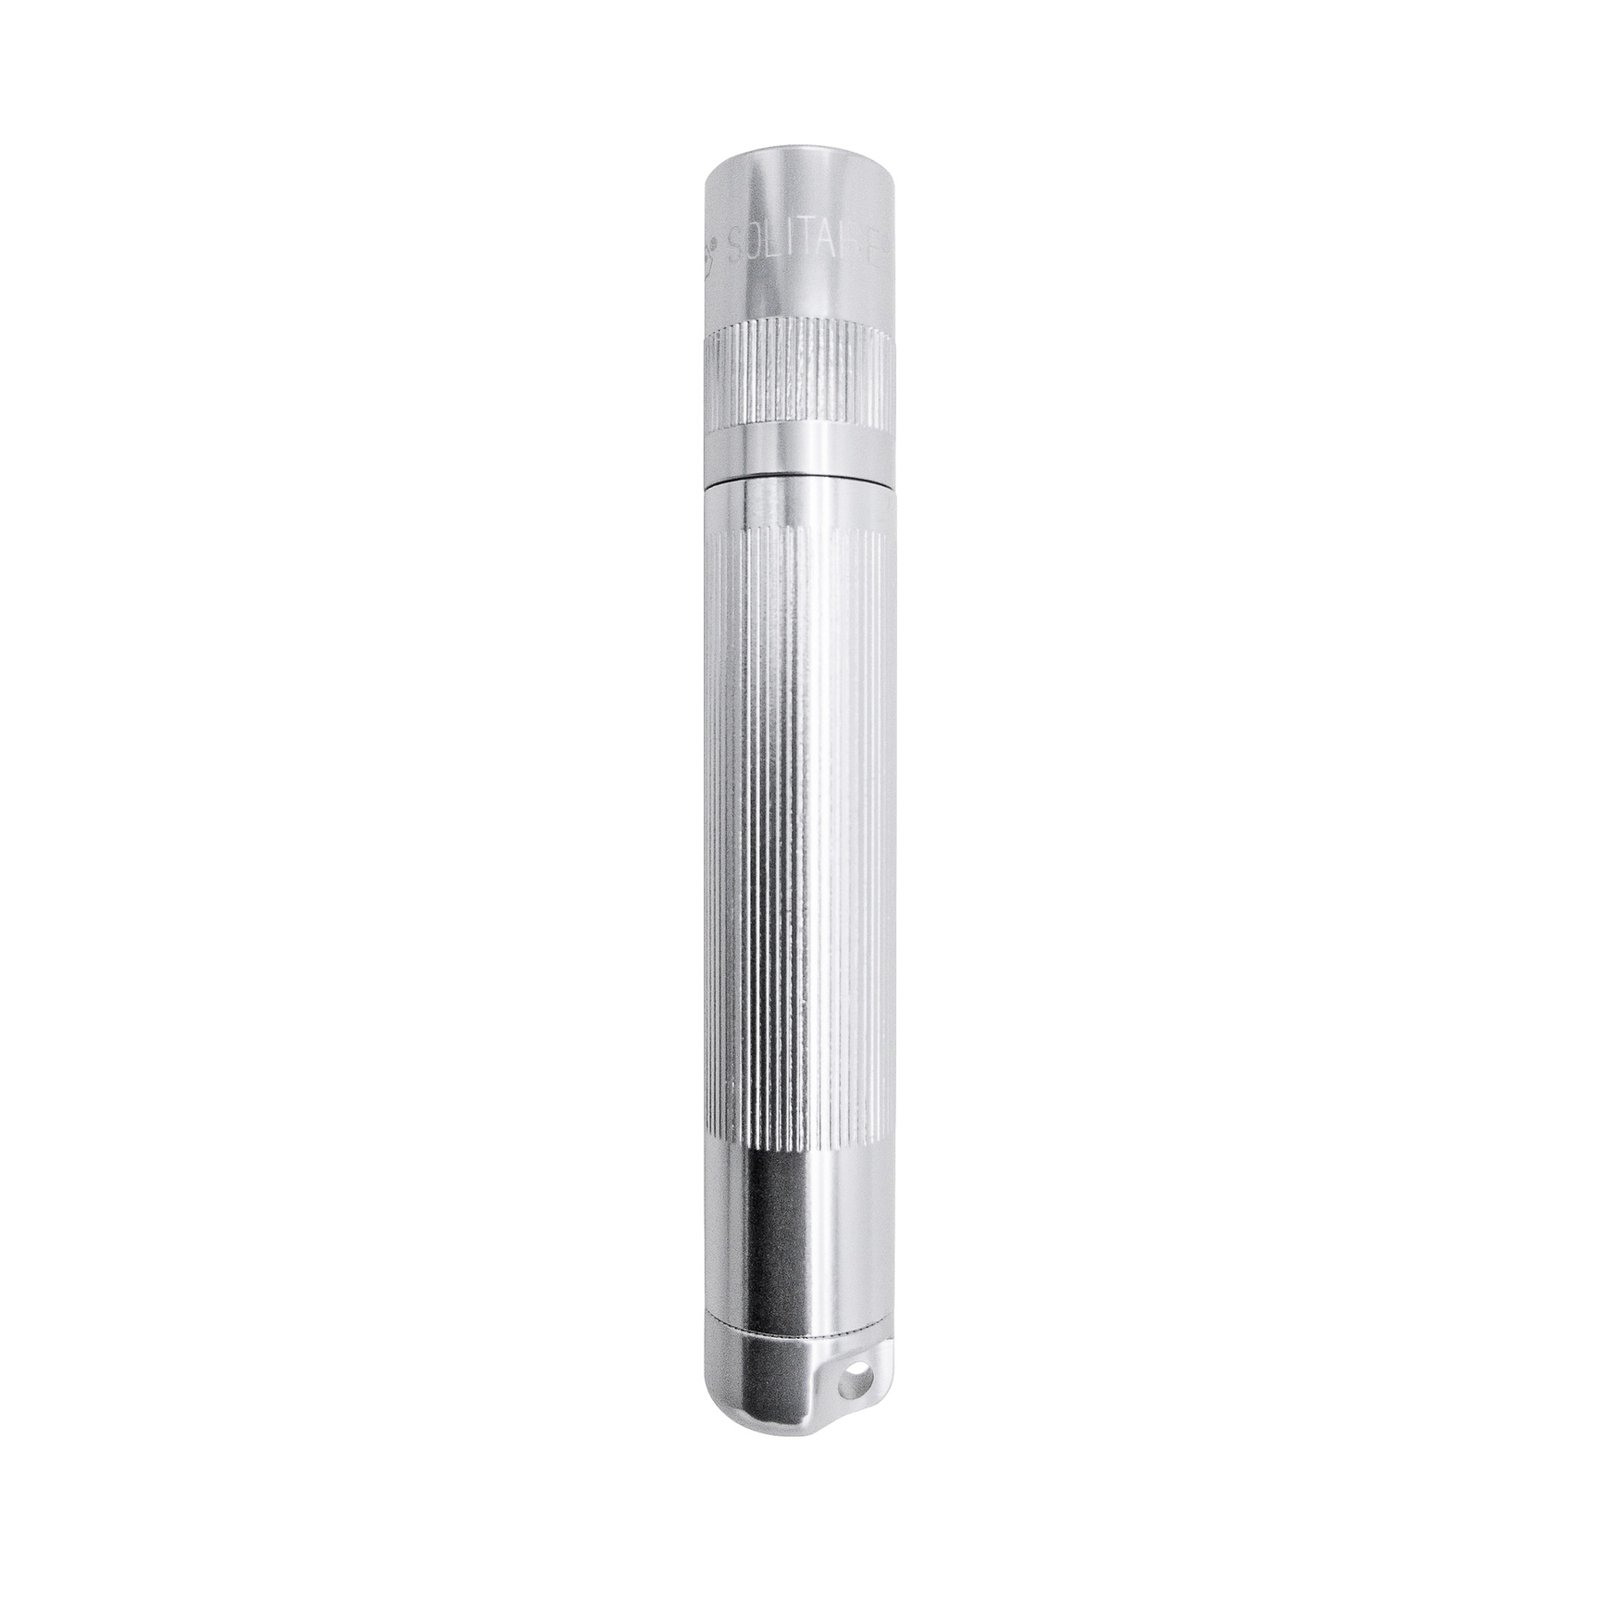 Maglite Xenon-Taschenlampe Solitaire 1-Cell AAA, Box, silber